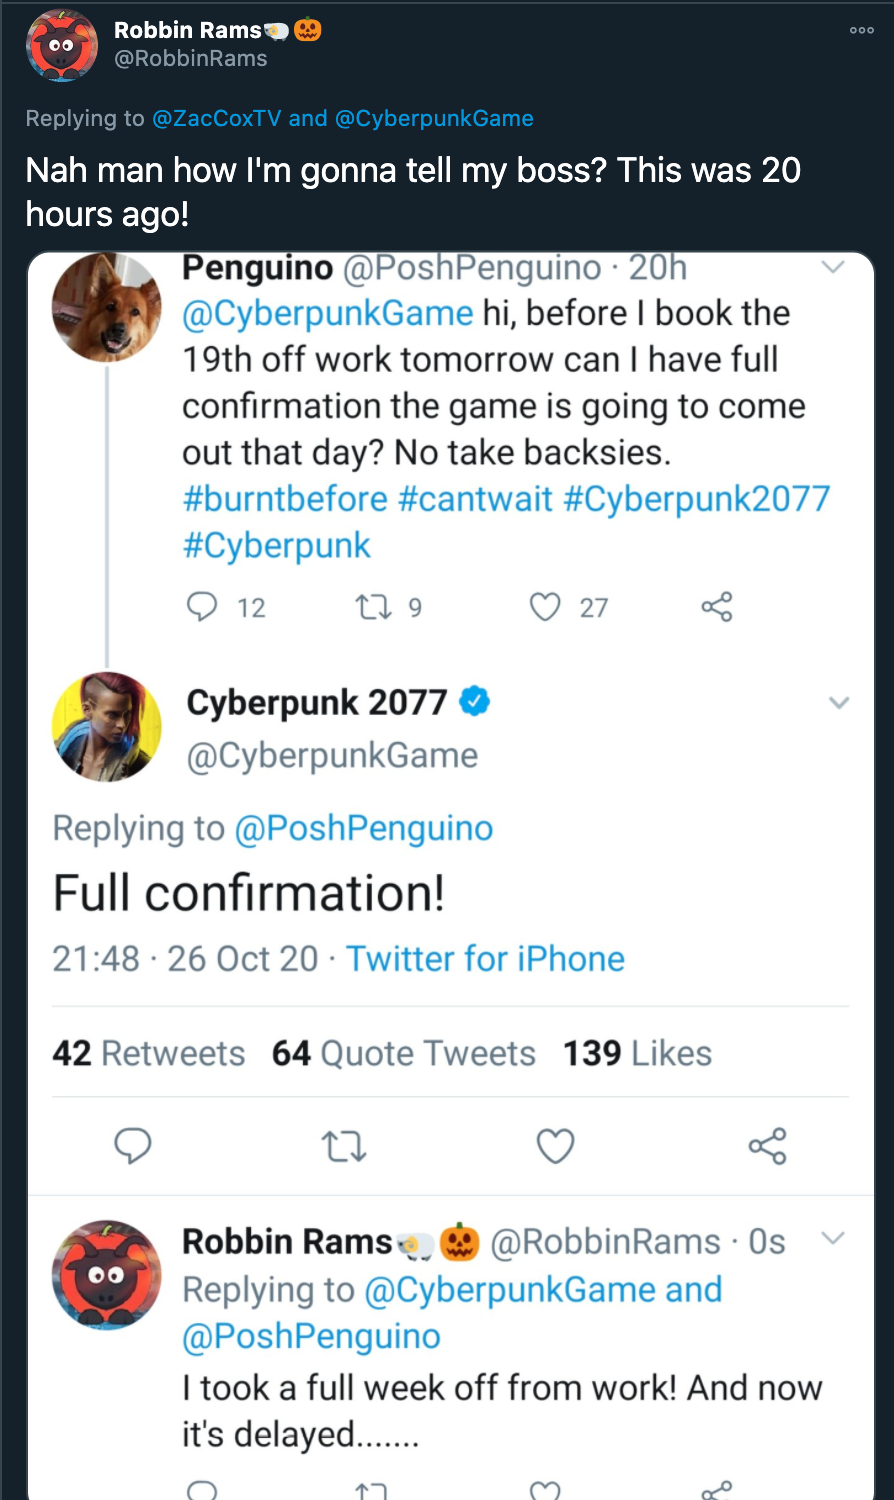 cyberpunk 2077 delay - Nah man how I'm gonna tell my boss? This was 20 hours ago! - hi, before I book the 19th off work tomorrow can I have full confirmation the game is going to come out that day? No take backs